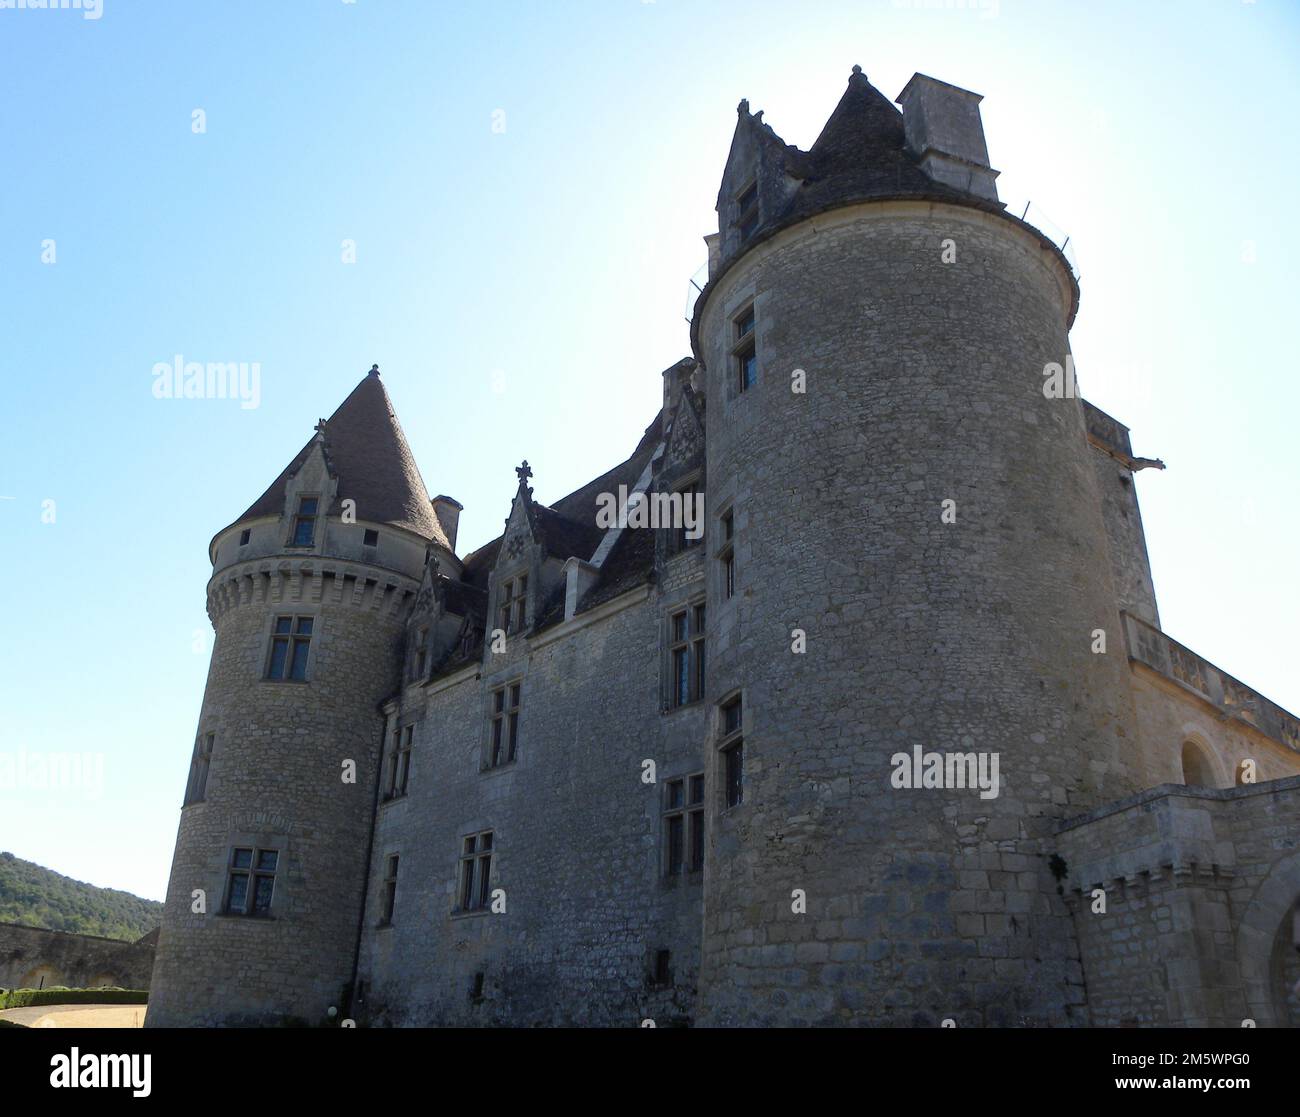 A low angle shot of the Chateau des Milandes during daytime in Castelnaud-la-Chapelle, France Stock Photo